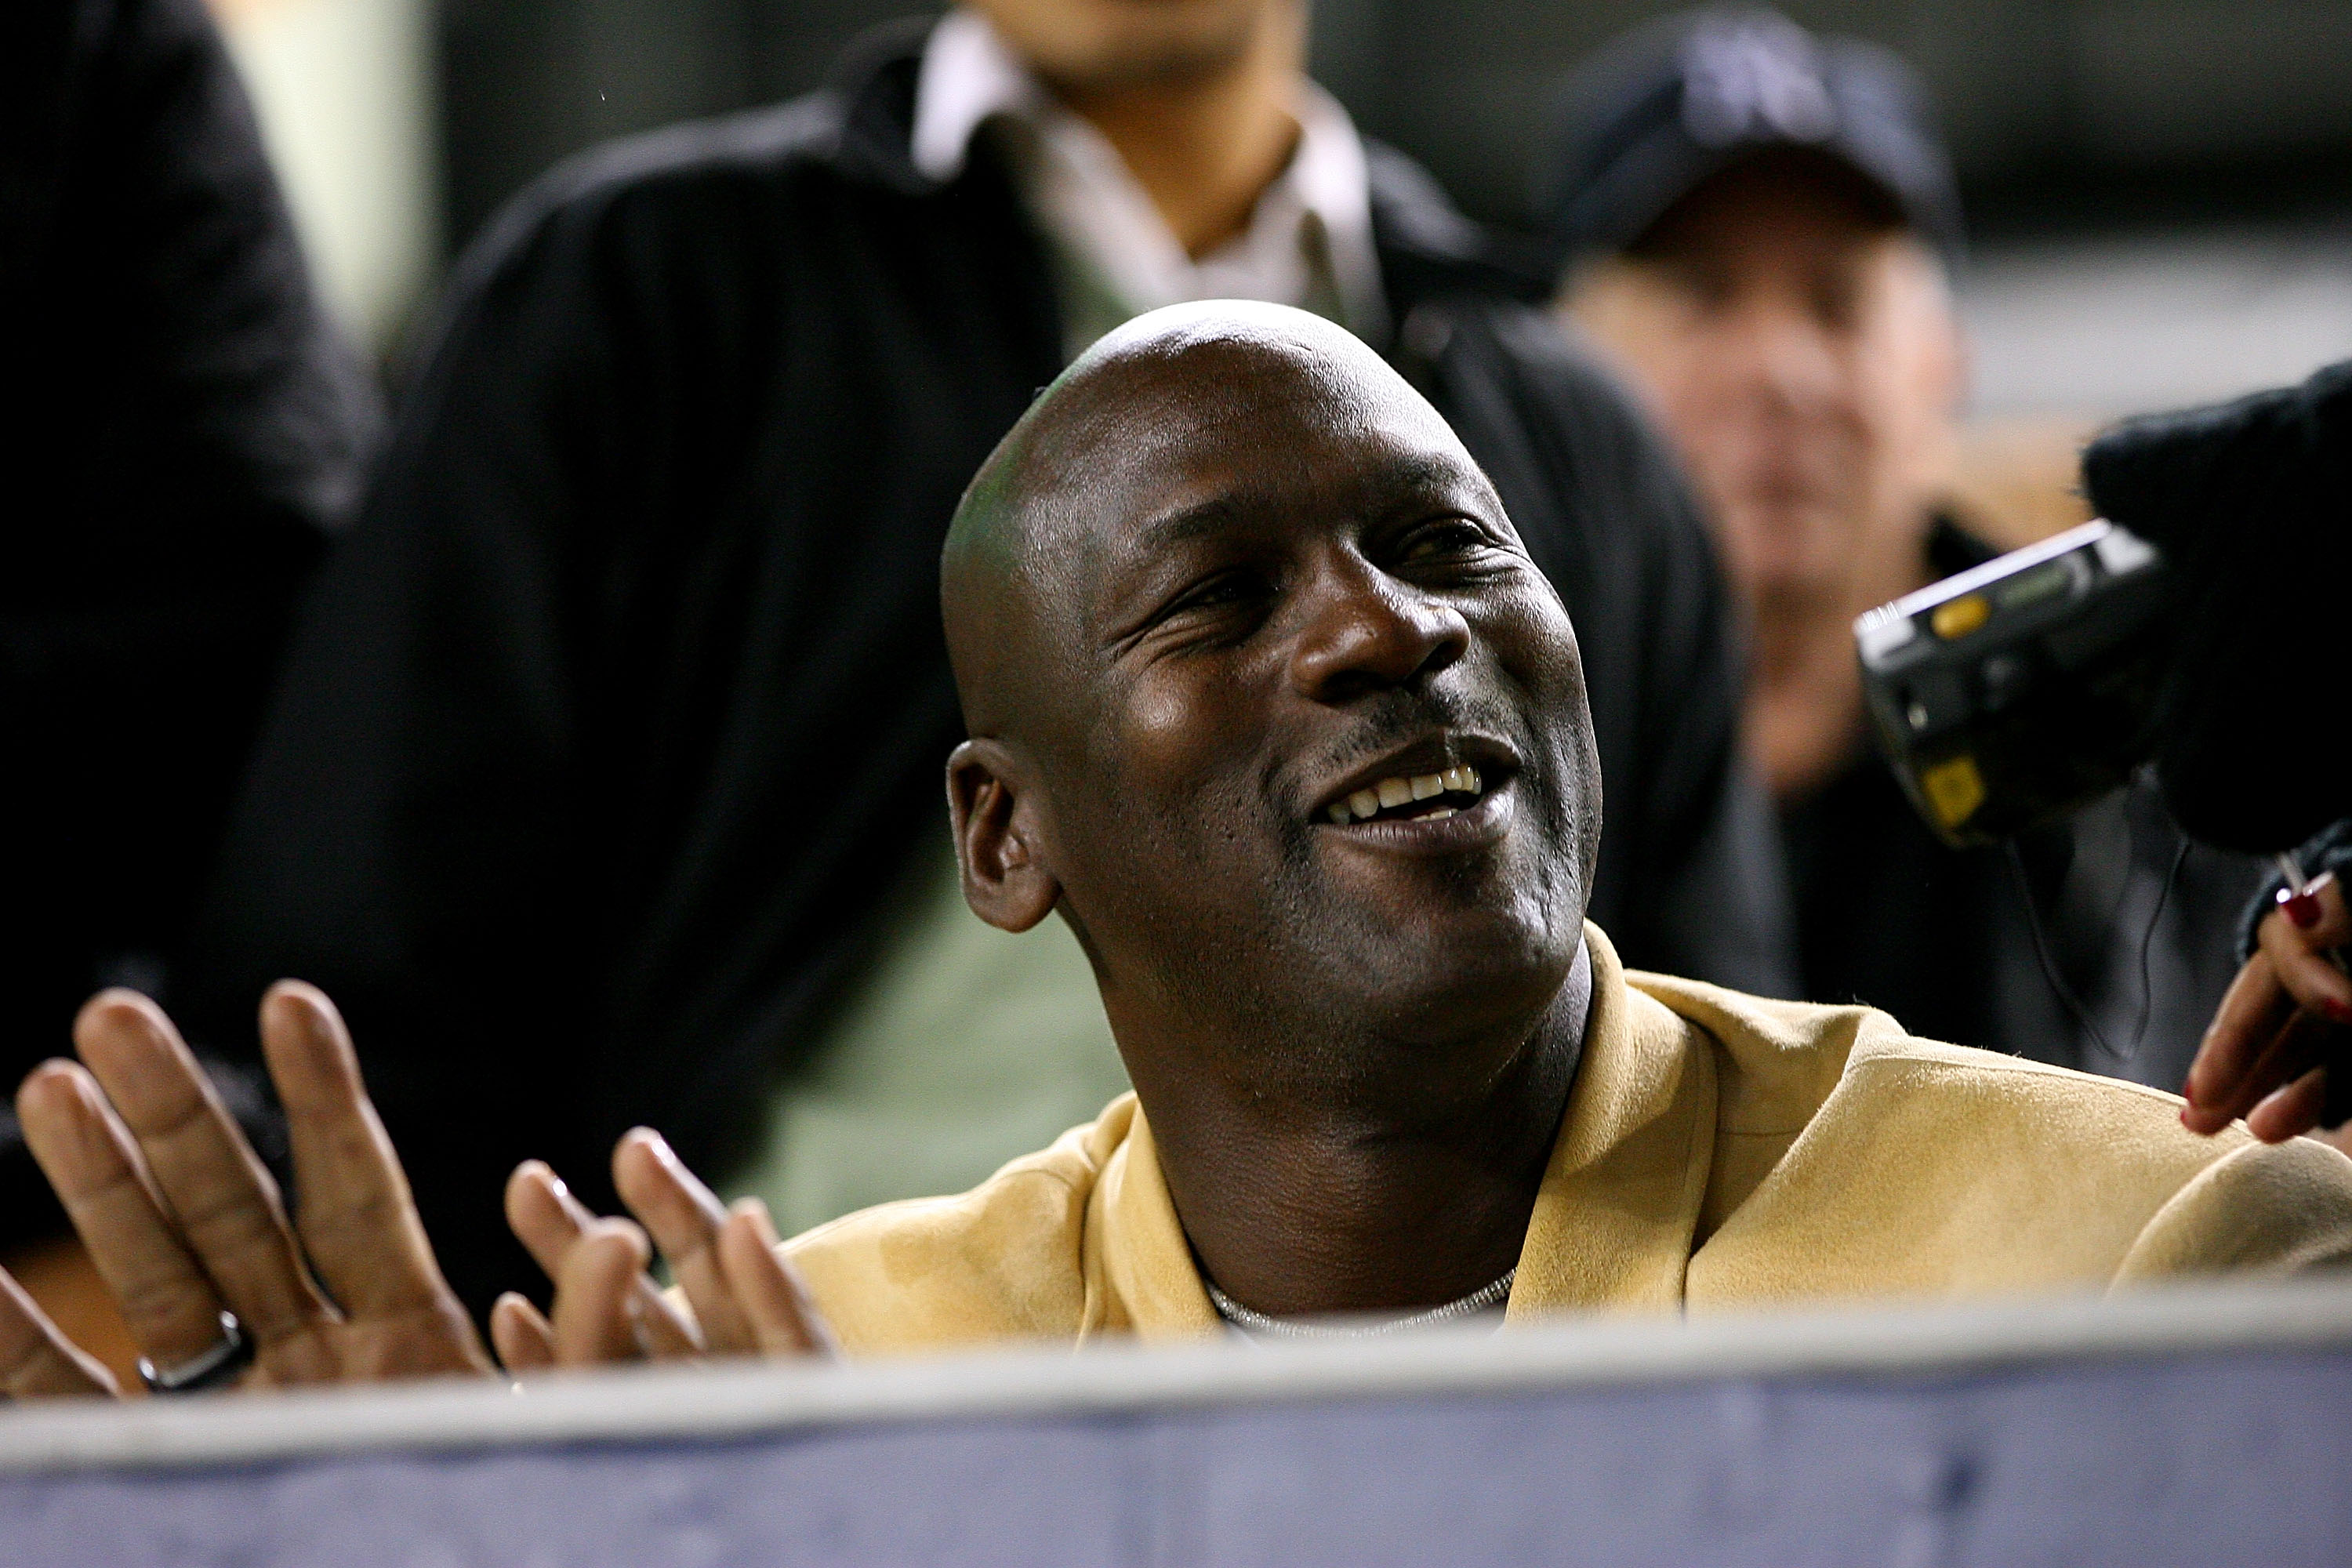 NEW YORK - OCTOBER 19:  Basketball Hall of Famer Michael Jordan sits in the stands during Game Four of the ALCS during the 2010 MLB Playoffs at Yankee Stadium on October 19, 2010 in the Bronx borough of New York City.  (Photo by Andrew Burton/Getty Images